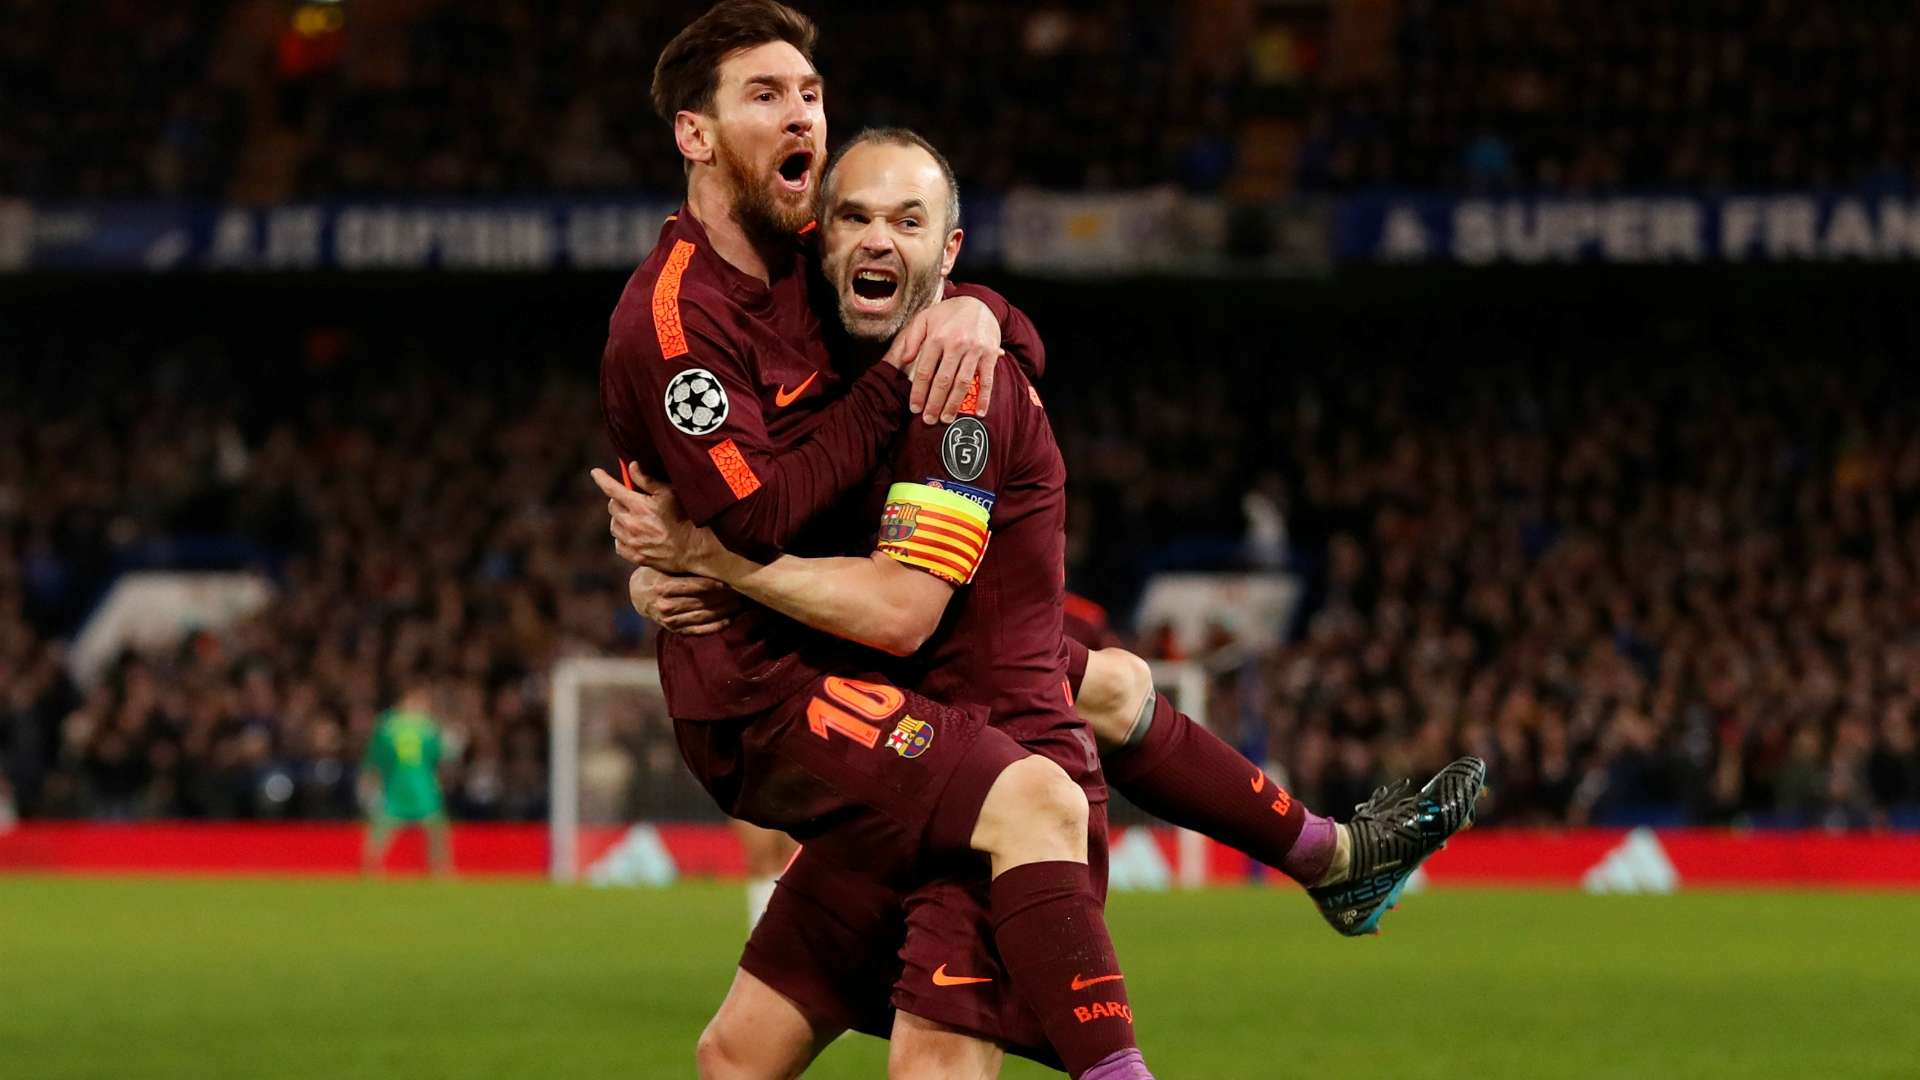 Lionel Messi, Andres Iniesta, Barcelona, Champions League 02202018